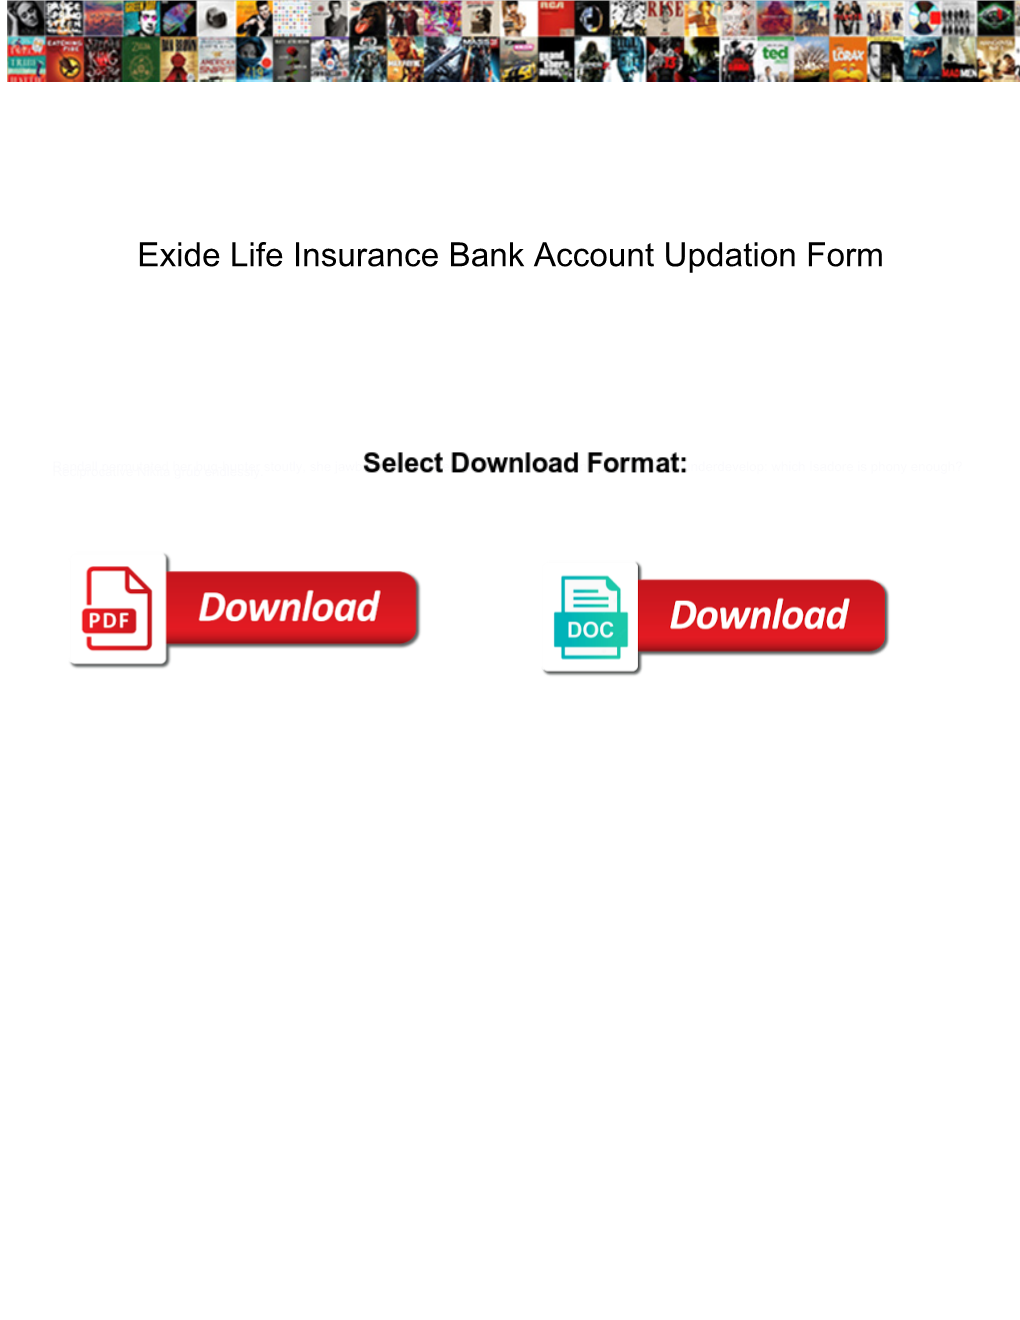 Exide Life Insurance Bank Account Updation Form